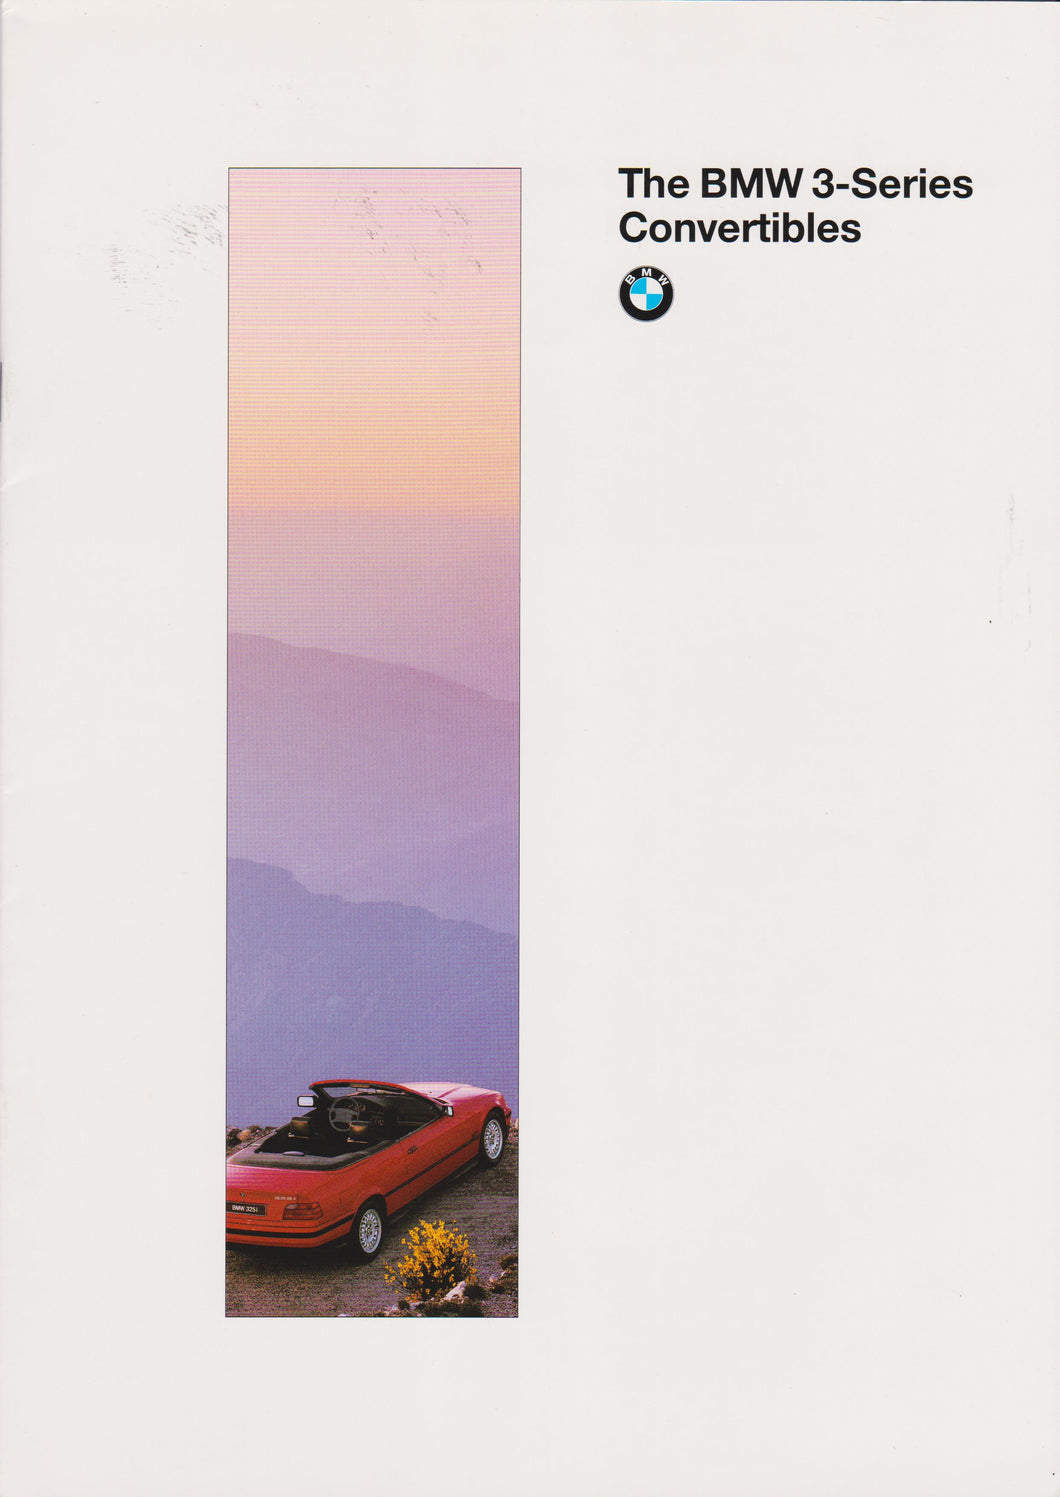 Brochure - The BMW 3-Series Convertibles (1995 printing)